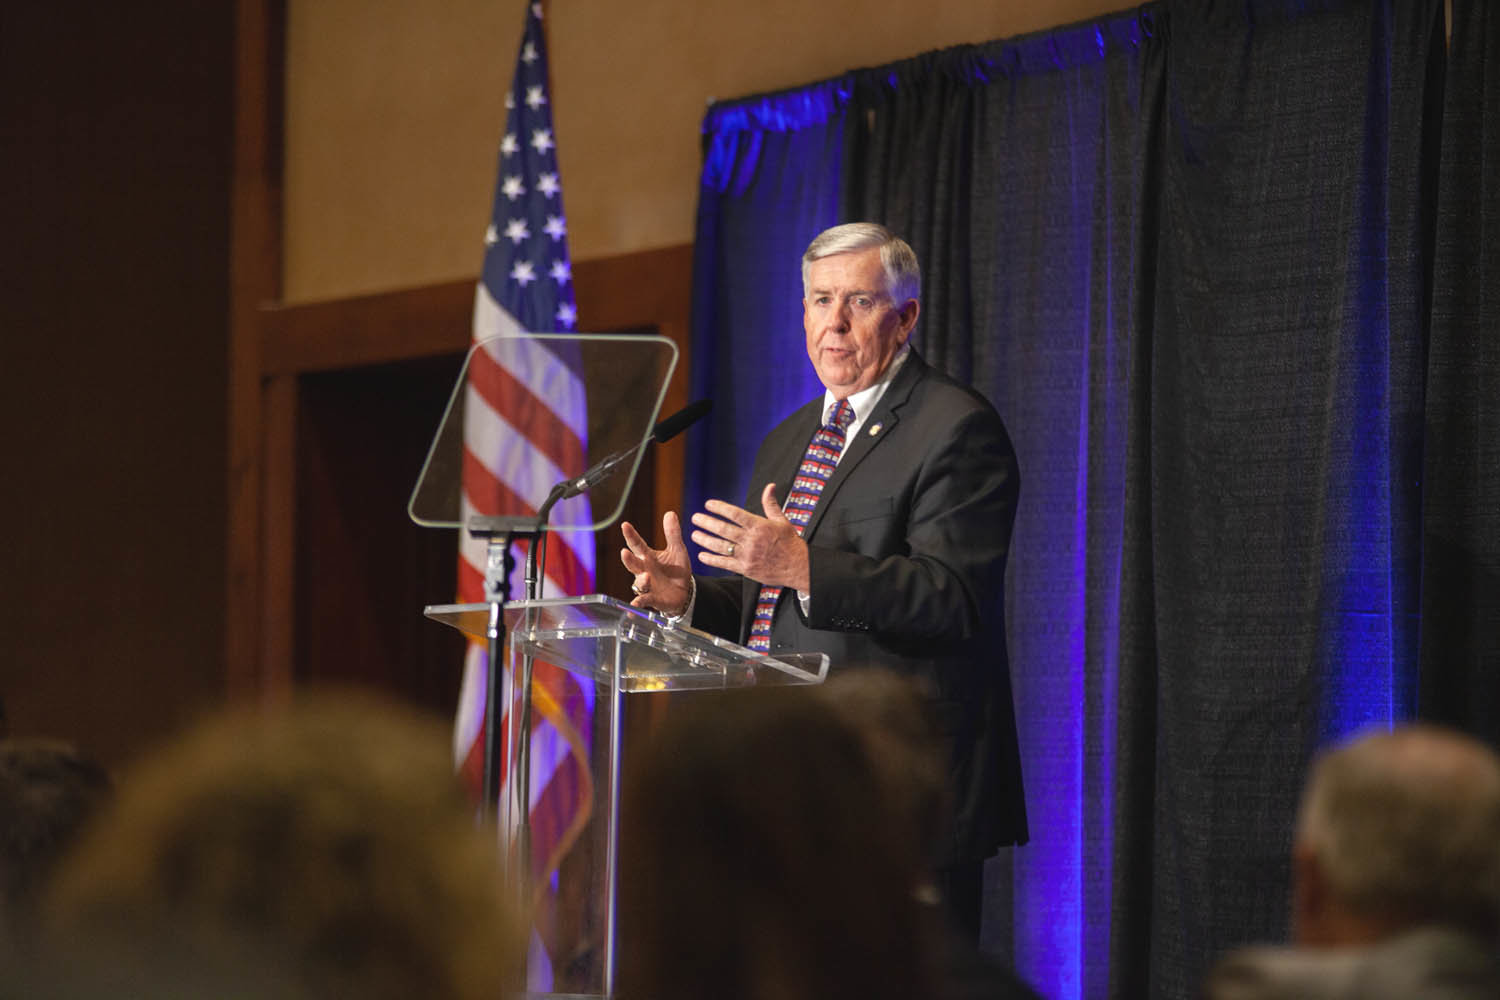 STATE OF STATE: Missouri Gov. Mike Parson speaks about 2019 legislative accomplishments at the White River Conference Center.